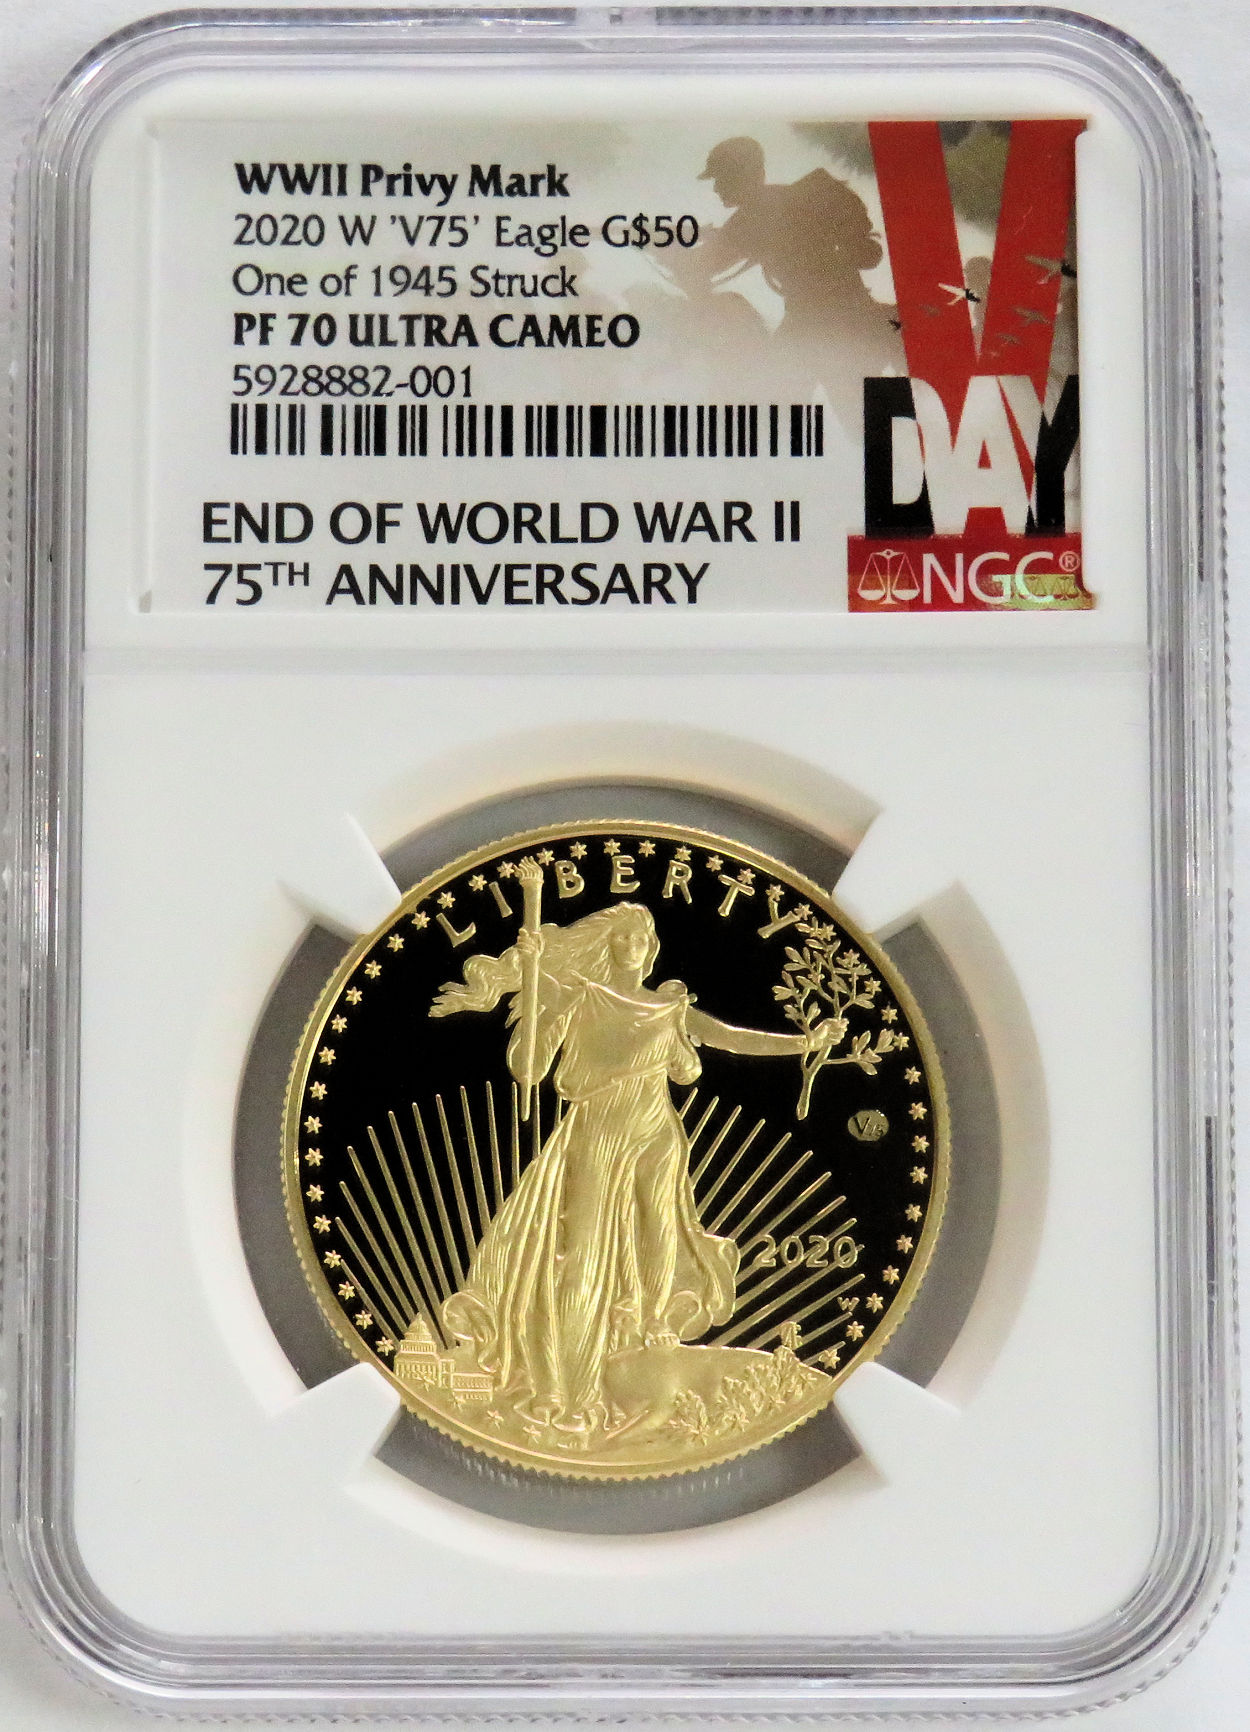 2020 W GOLD V75 END OF WWII PROOF AMERICAN EAGLE $50 1 OZ COIN NGC PROOF 70 ULTRA CAMEO 1,945 MINTED